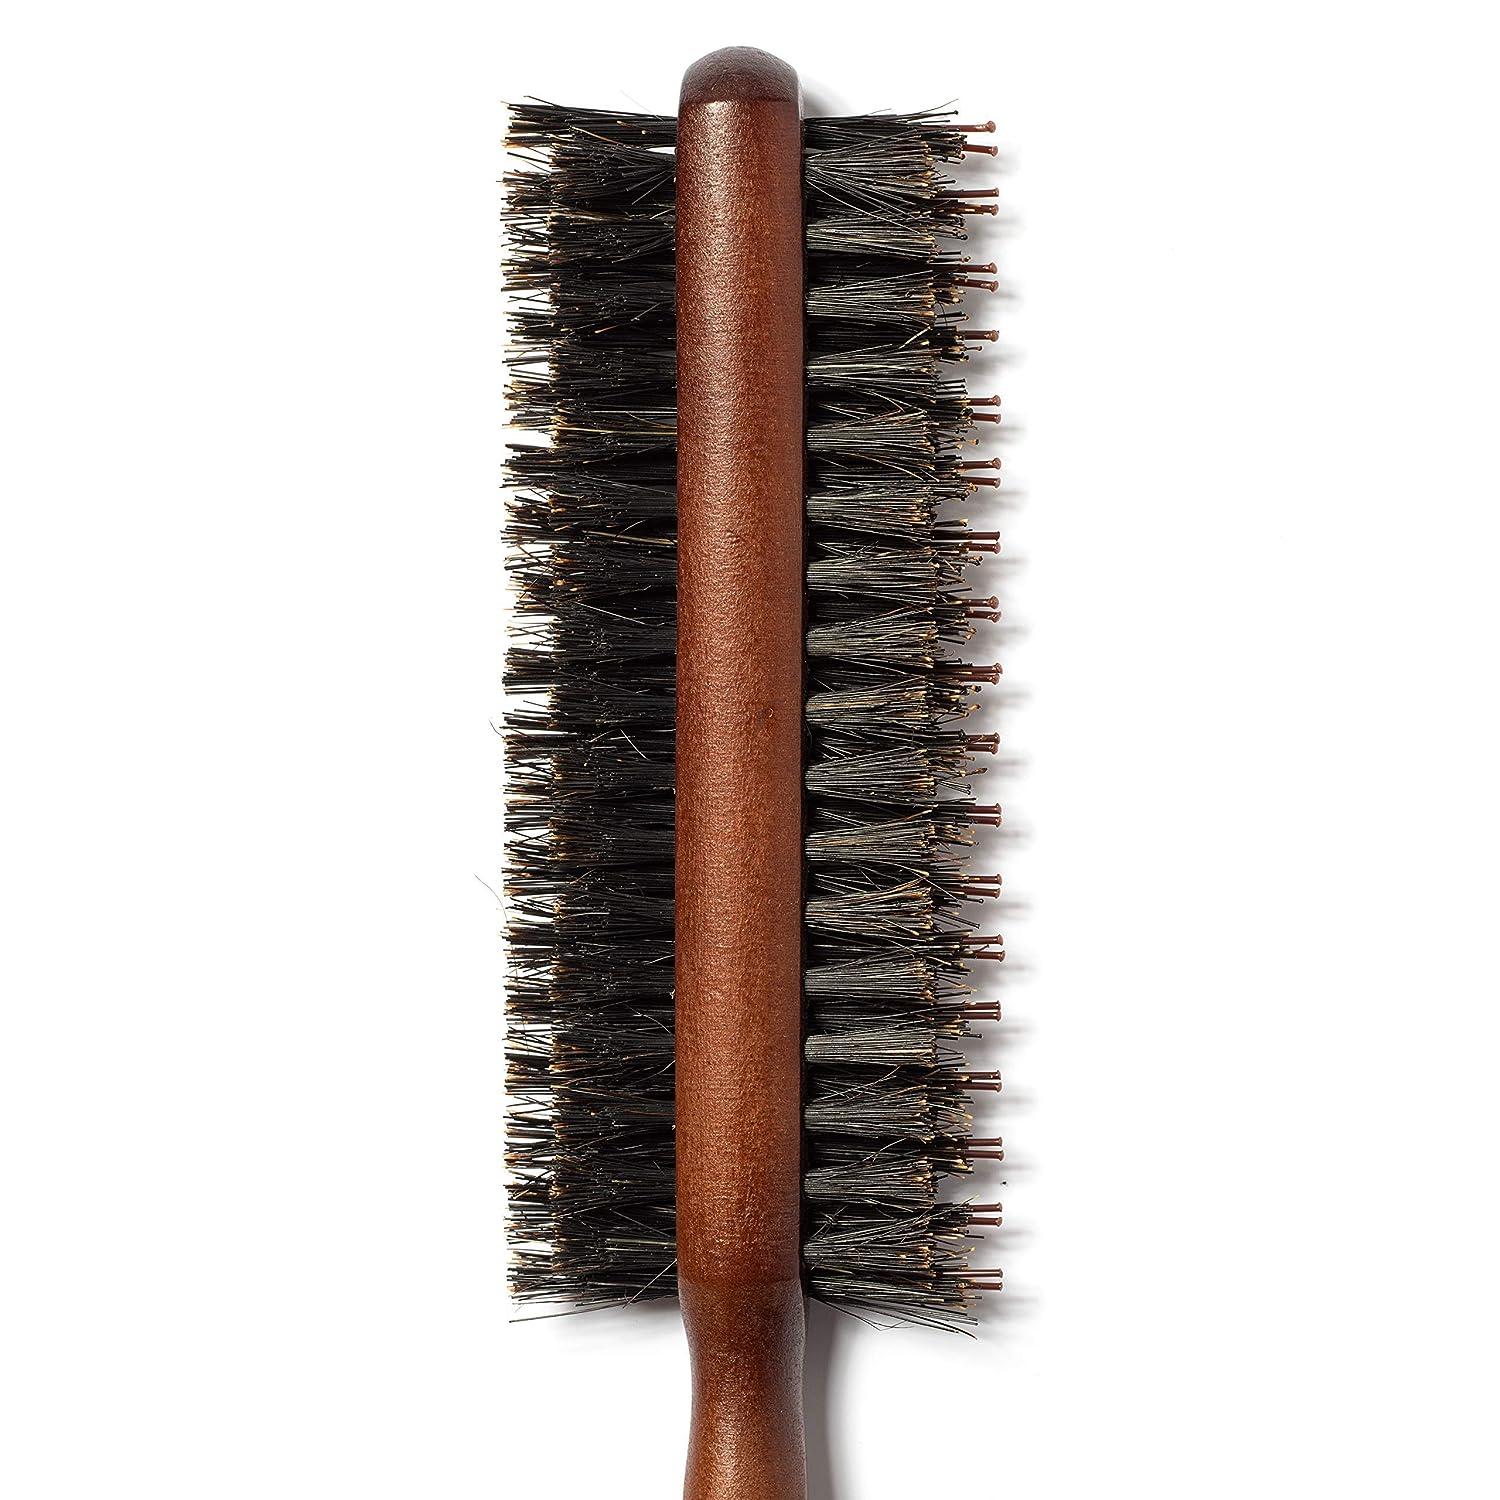 Made in Germany - Boar Bristle Round Brush - Adds Volume and Bounce, Promotes